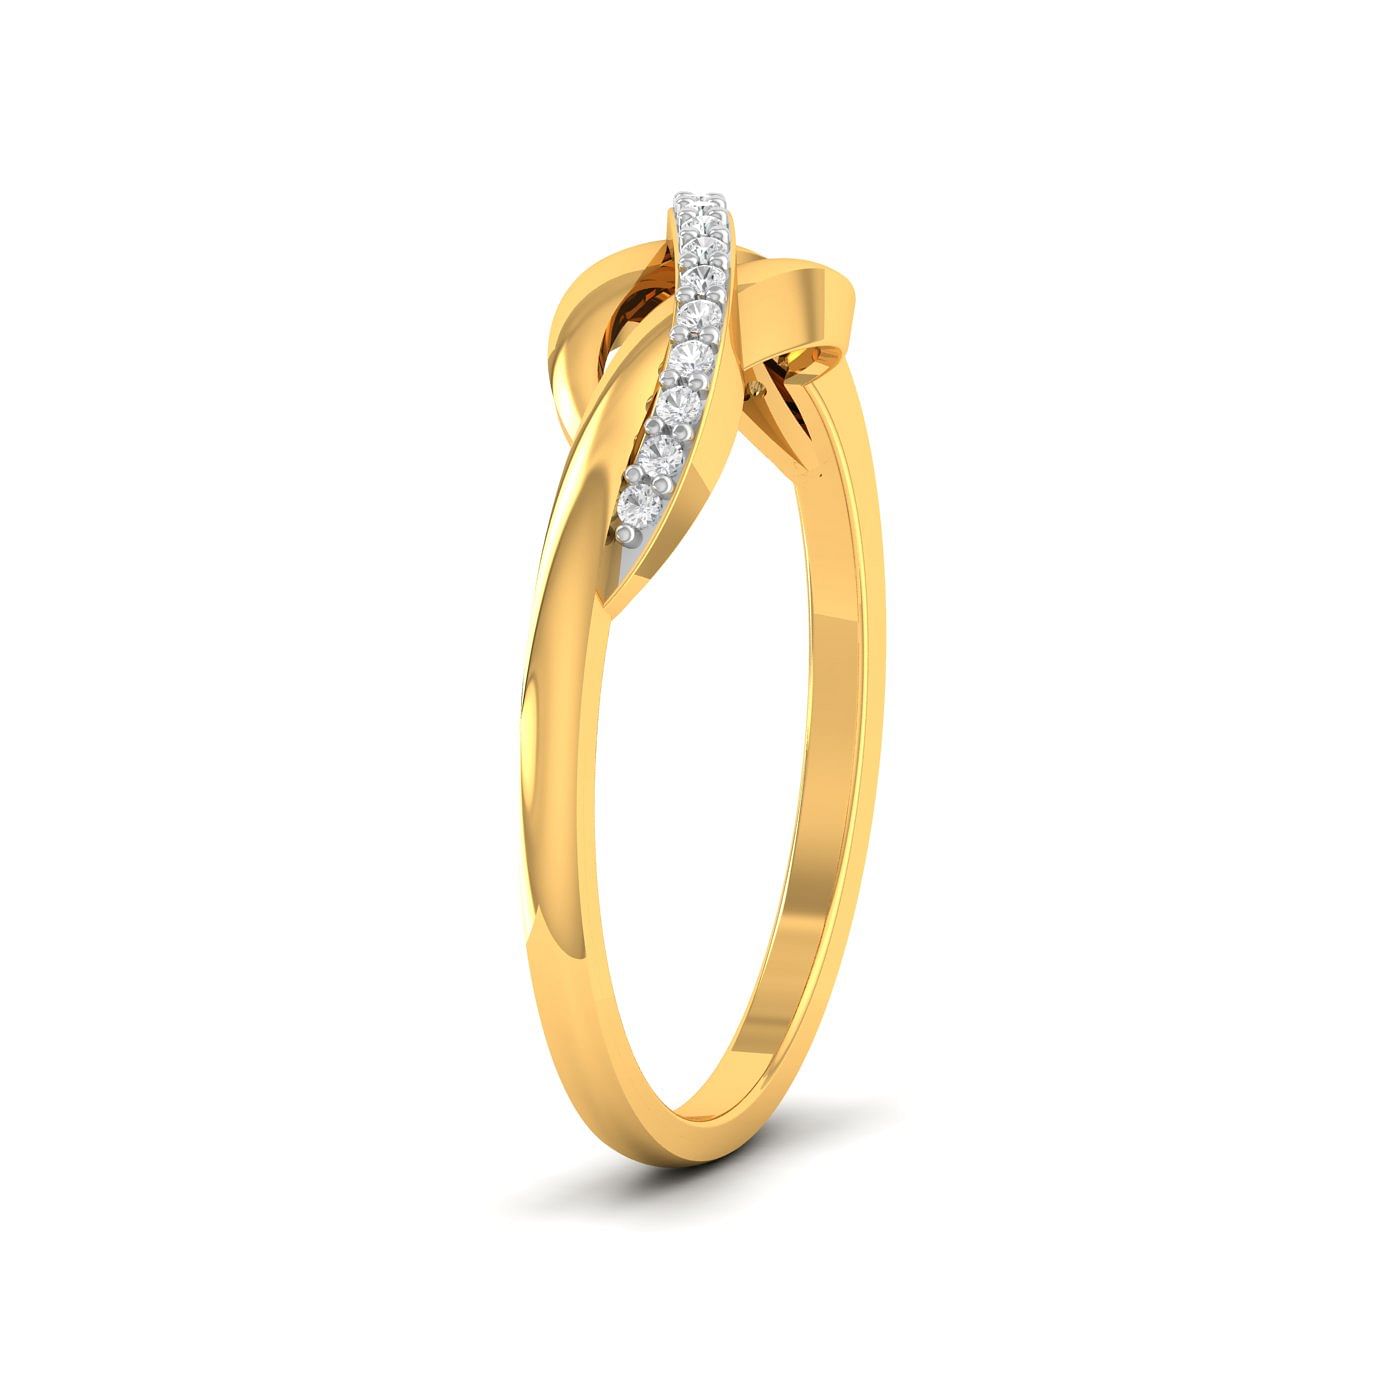 Wavy Diamond Delicate Ring Yellow Gold For Daily Wear Or Gift